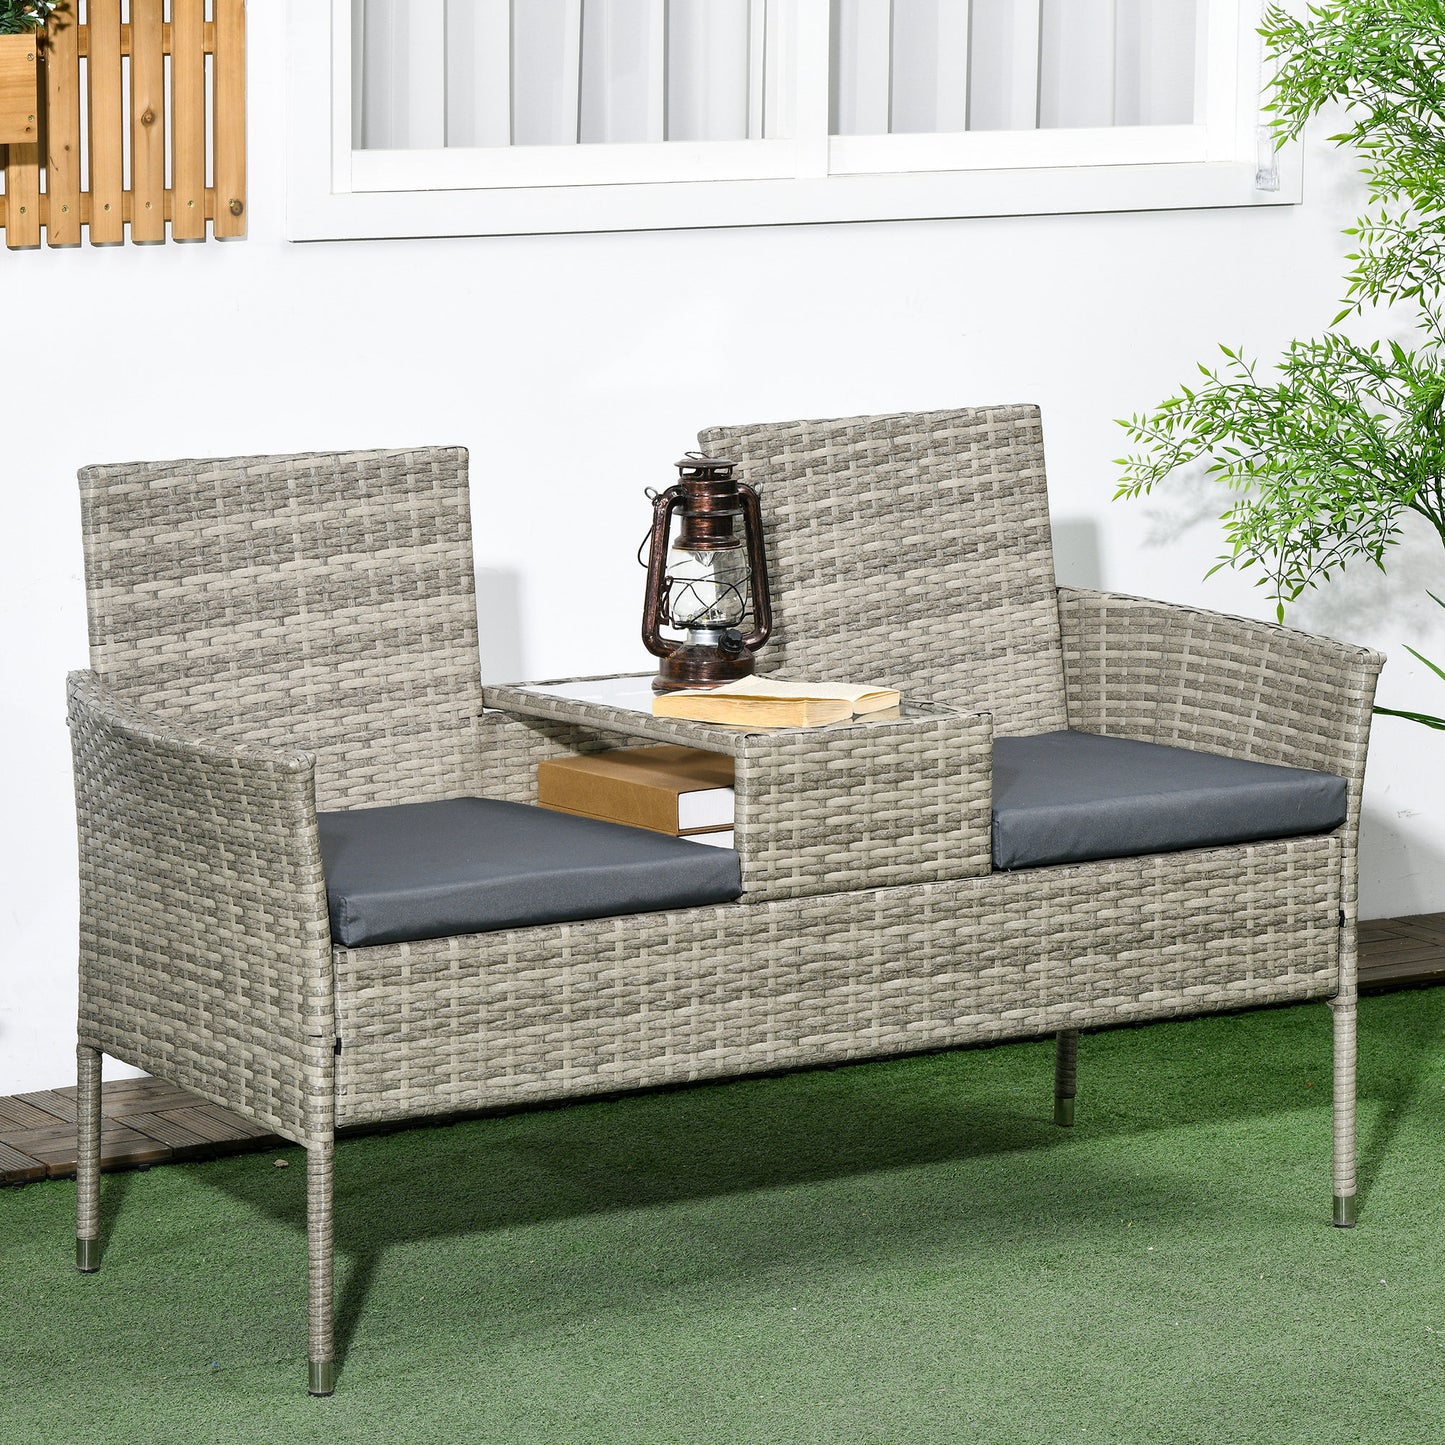 Outsunny Two-Seat Rattan Chair, with Middle Table - Light Grey